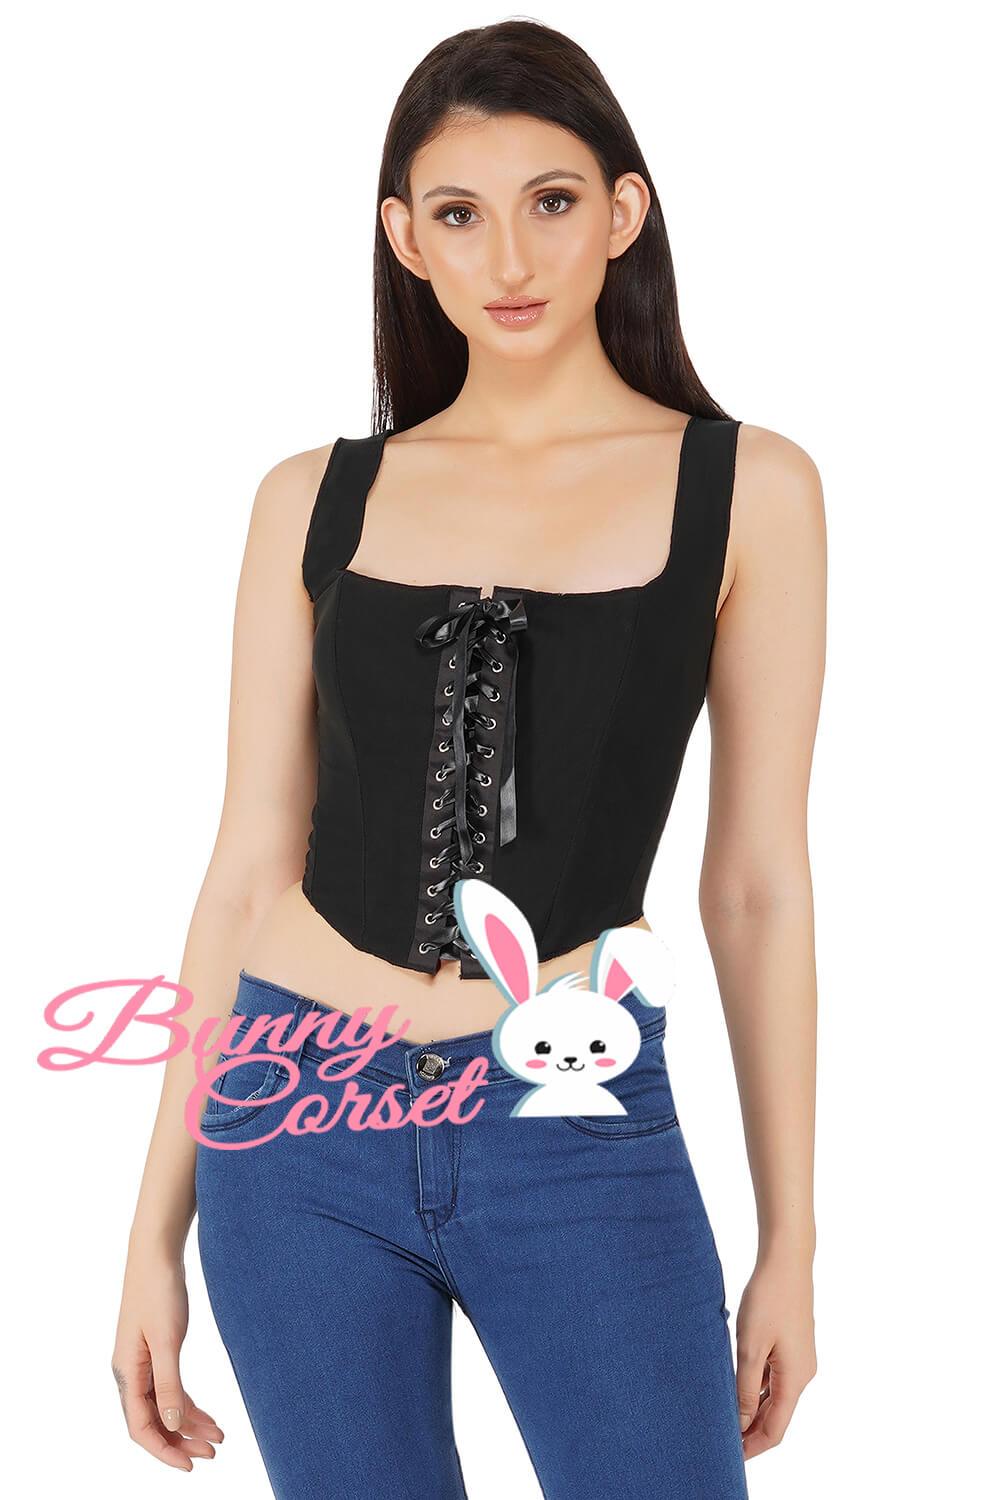 This corset top is of high quality mesh material. The corset top